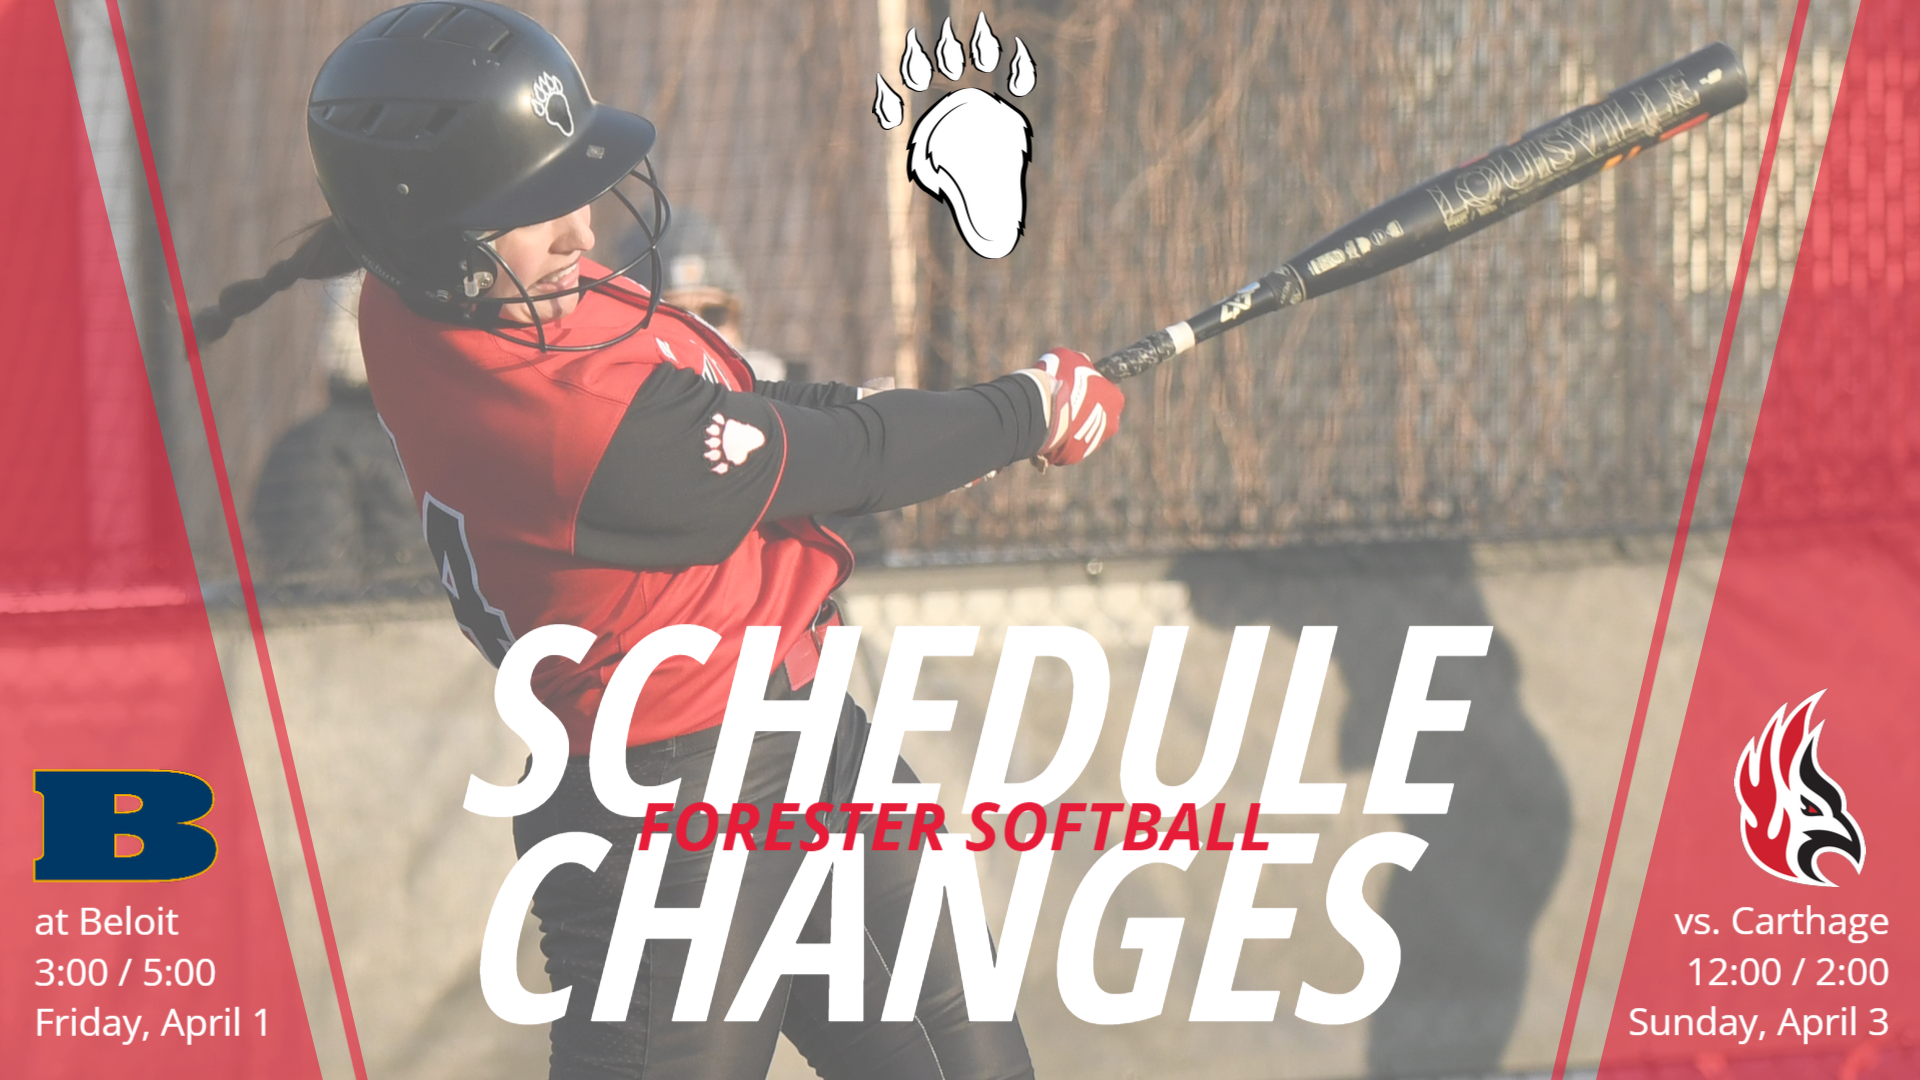 Schedule Changes for Softball this Weekend